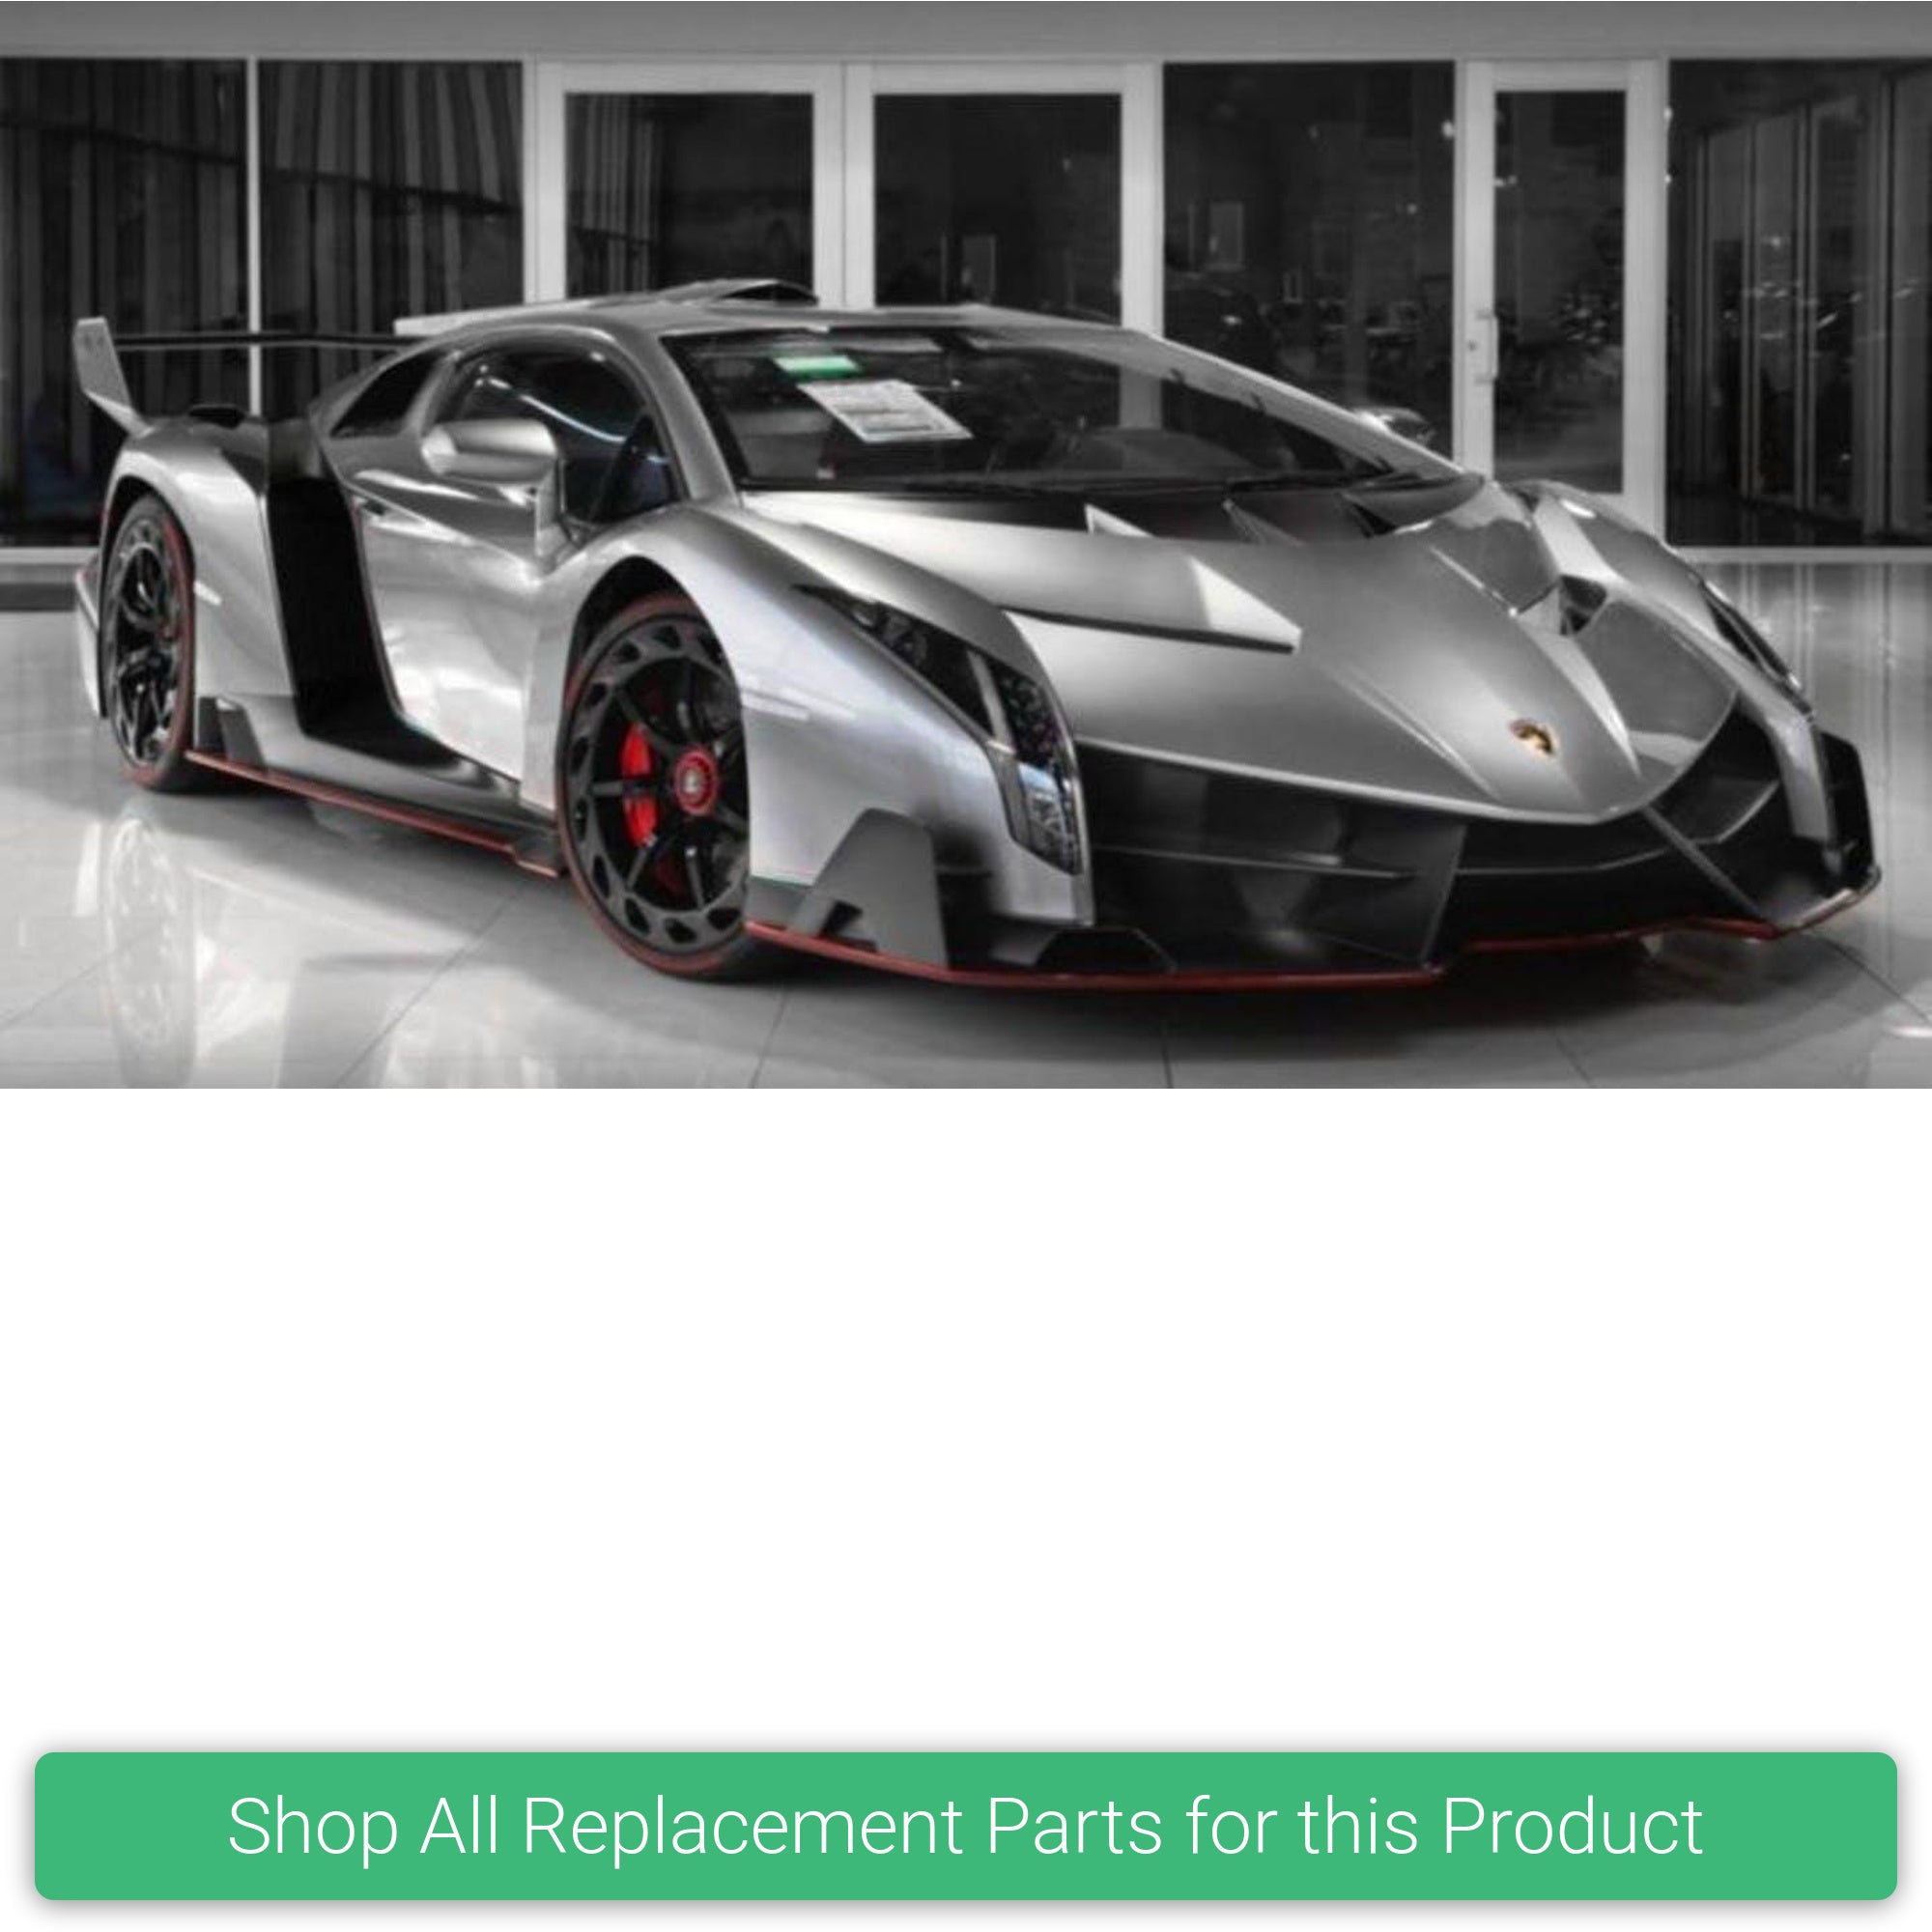 Replacement Parts and Spares for Kids Lamborghini Veneno - VENENO-VARI - XMX615 Lamborghini Veneno